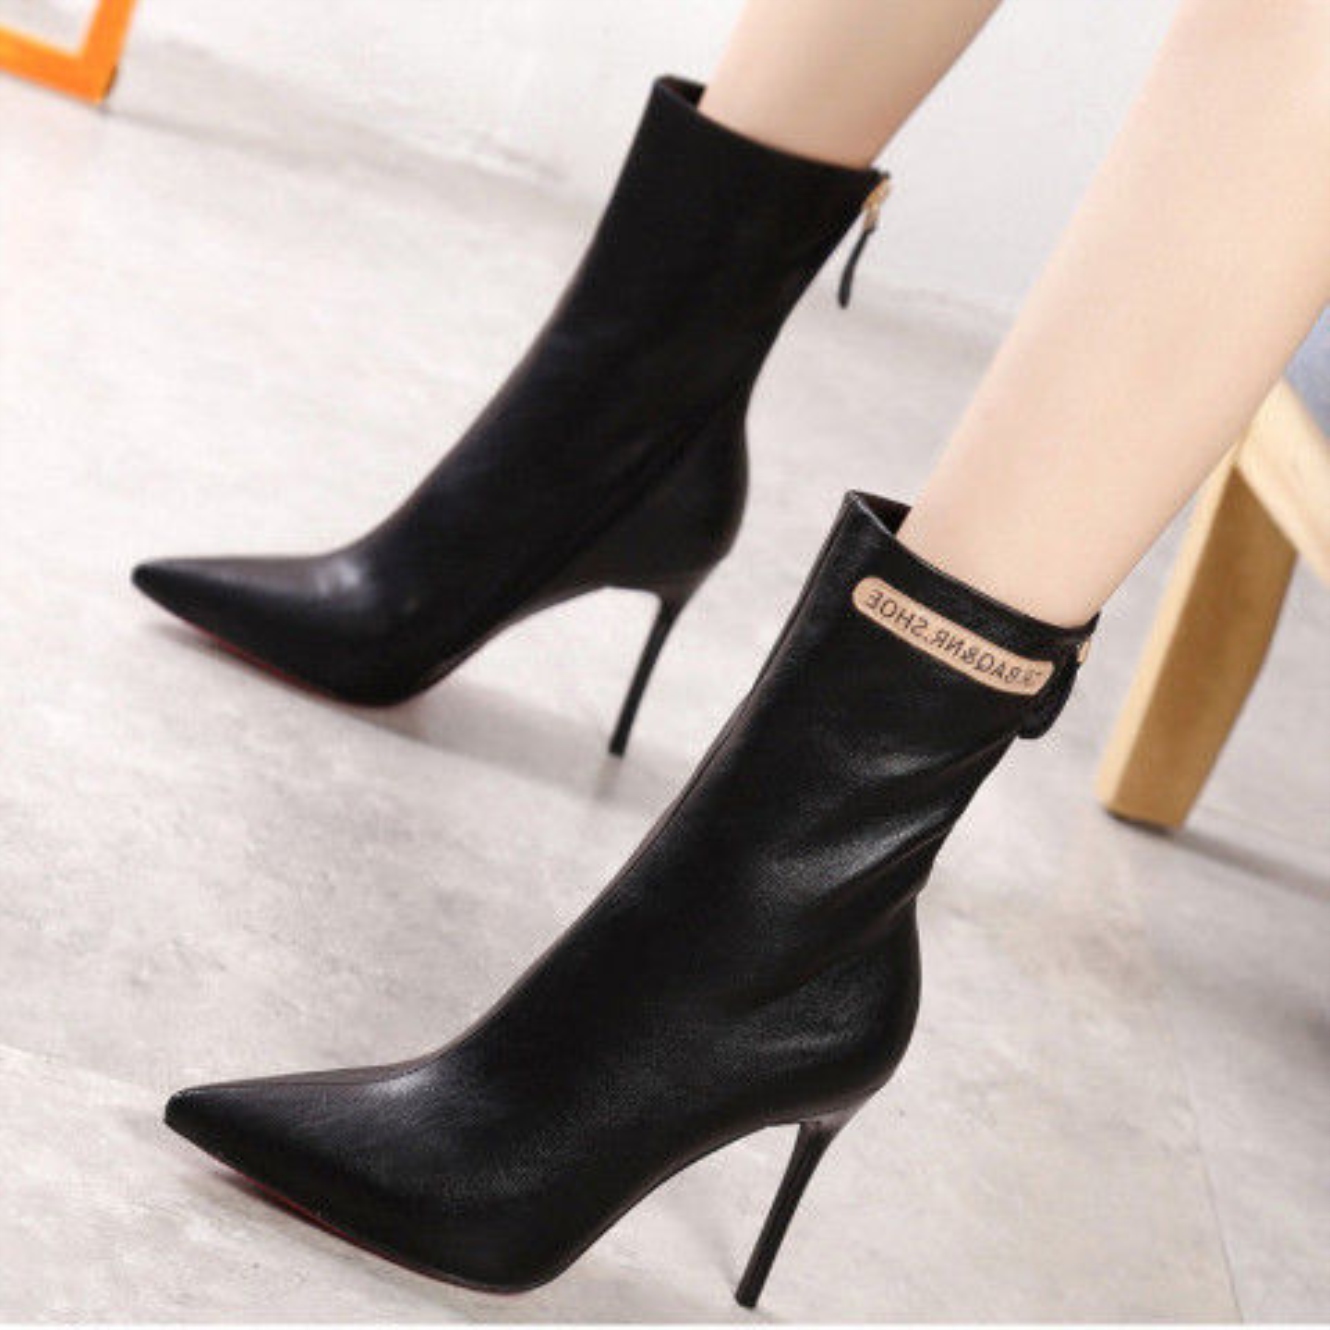 Midress Women Ankle Boots Kitten Heels Pointed Toe Shoes Thin Heels Shoes Zip Buckle Casual Short Fashion Boot